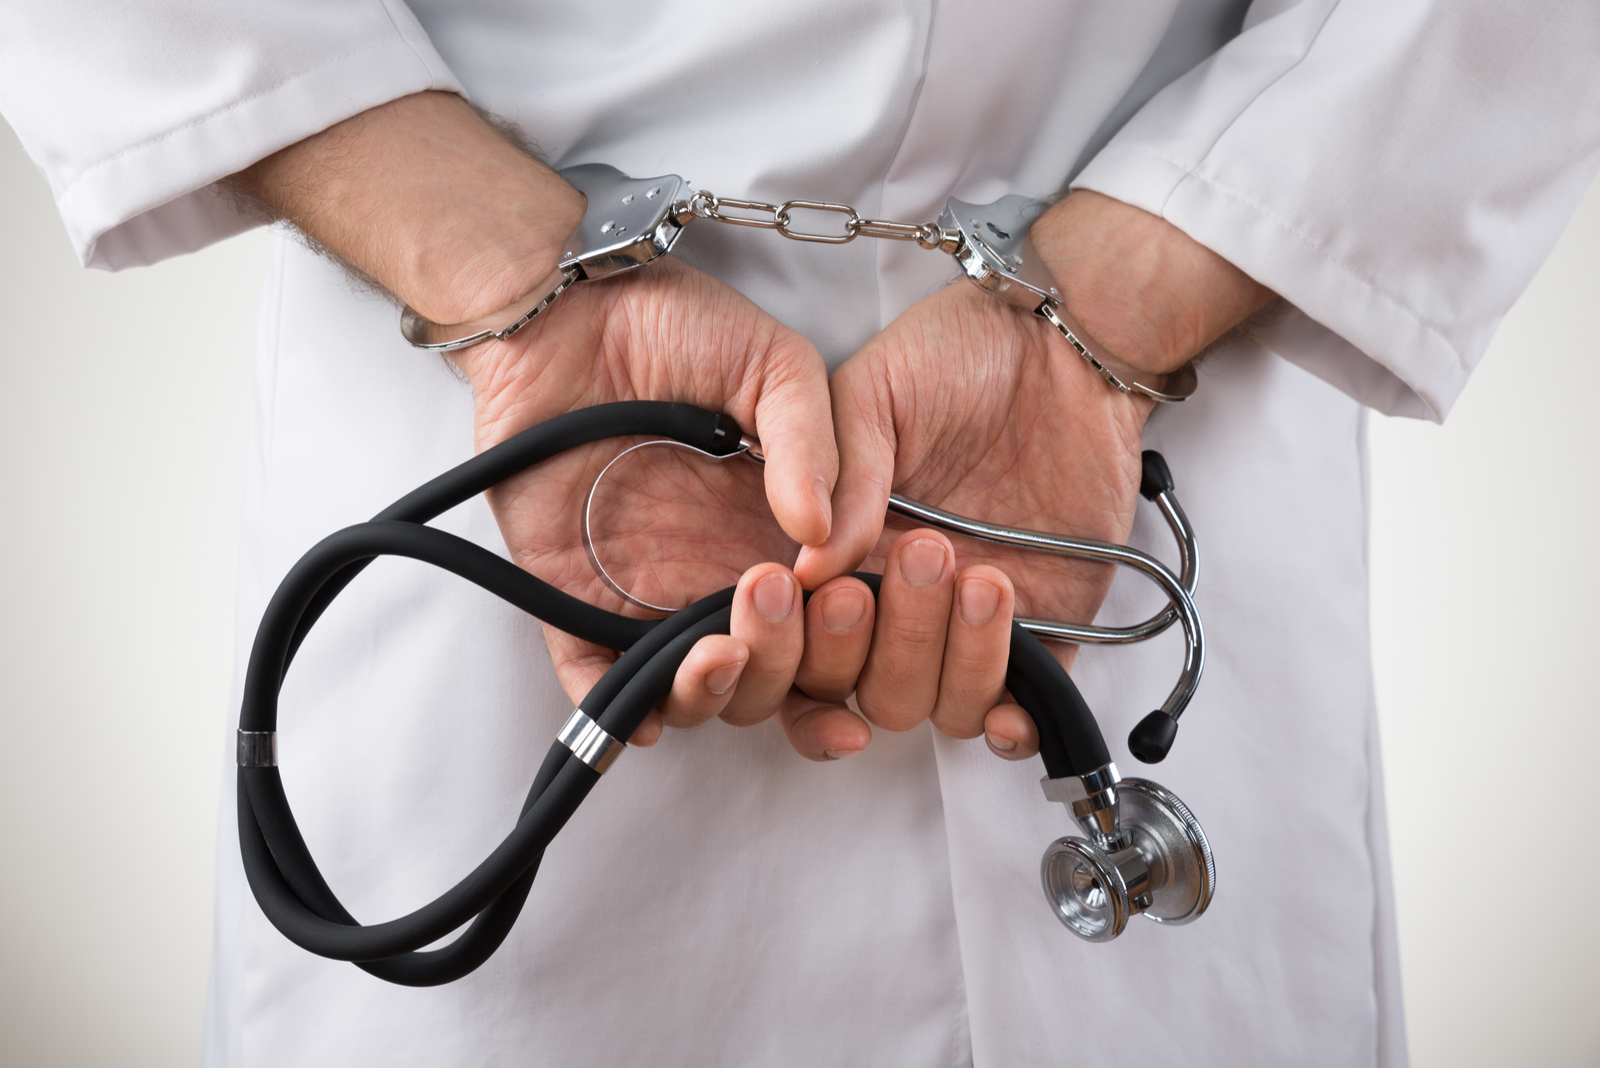 Medicare Fraud and Abuse: What is it exactly?